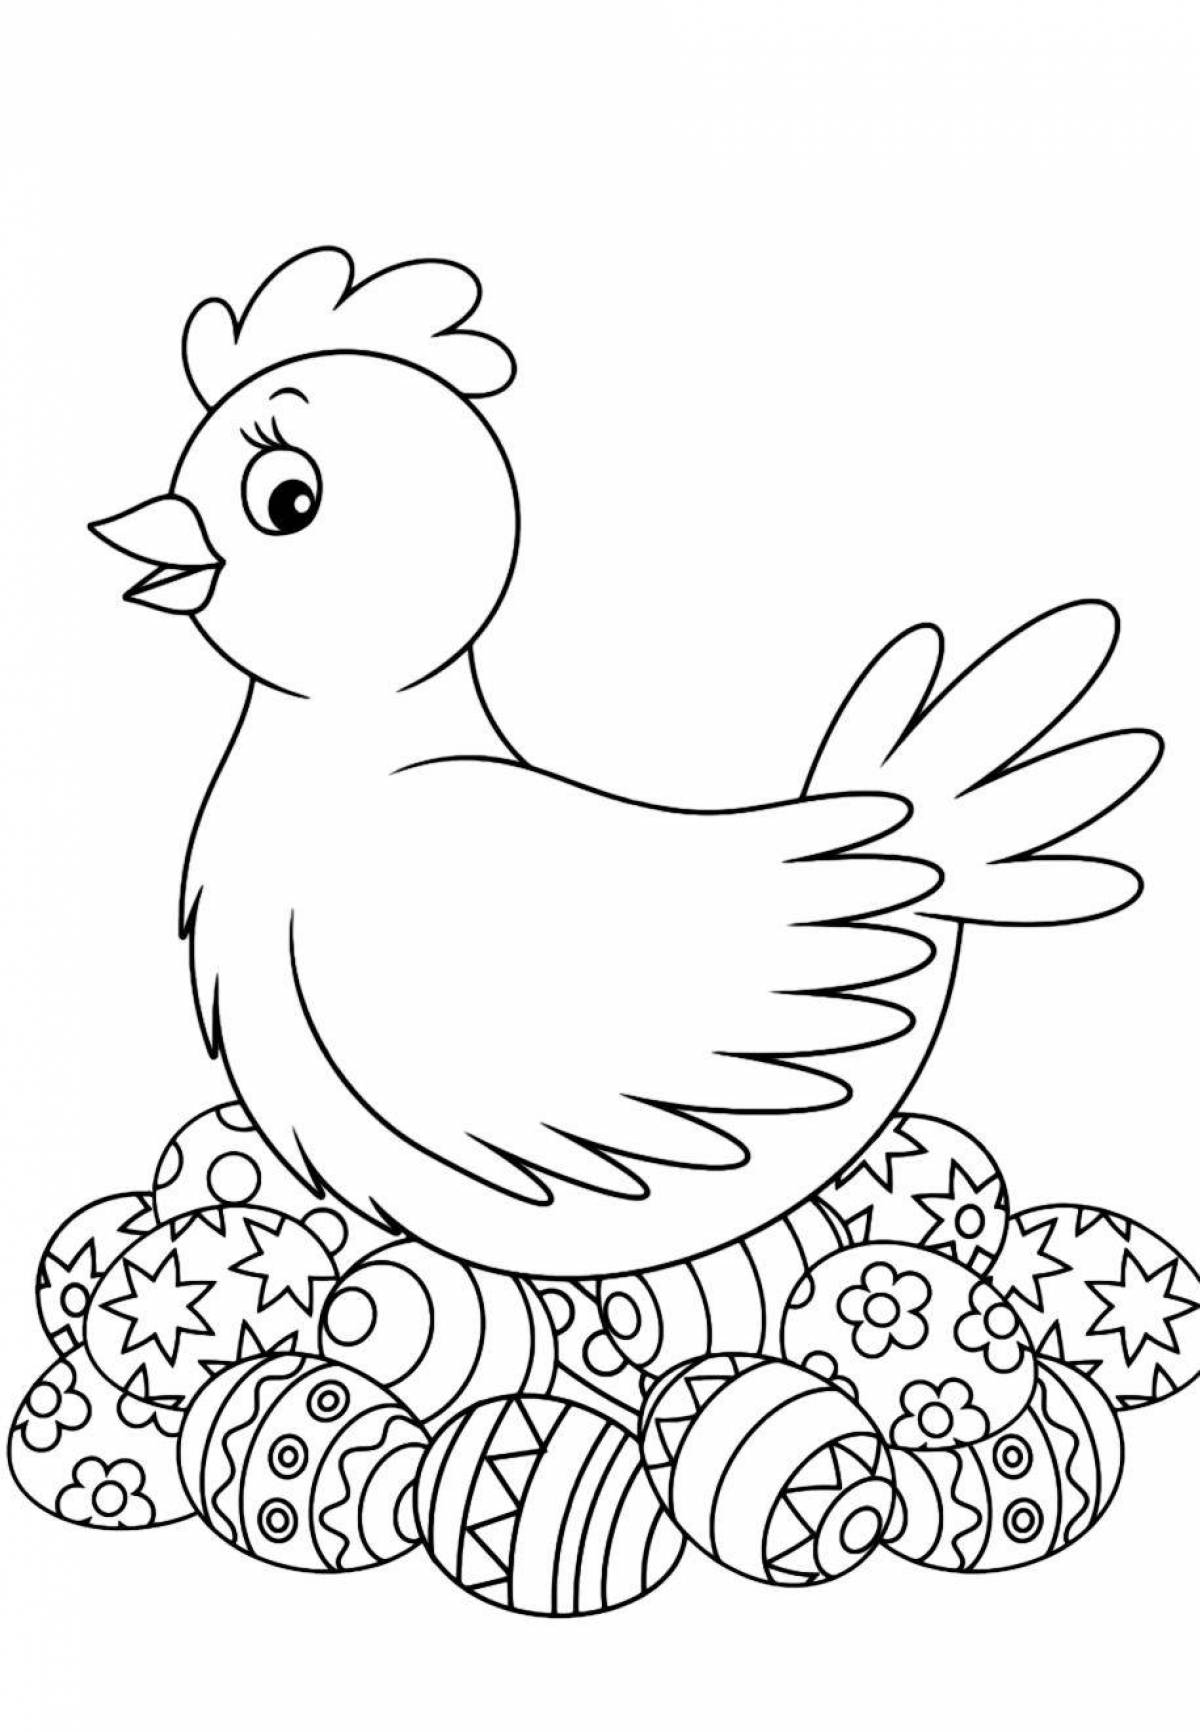 Attractive chick pockmarked coloring book for kids